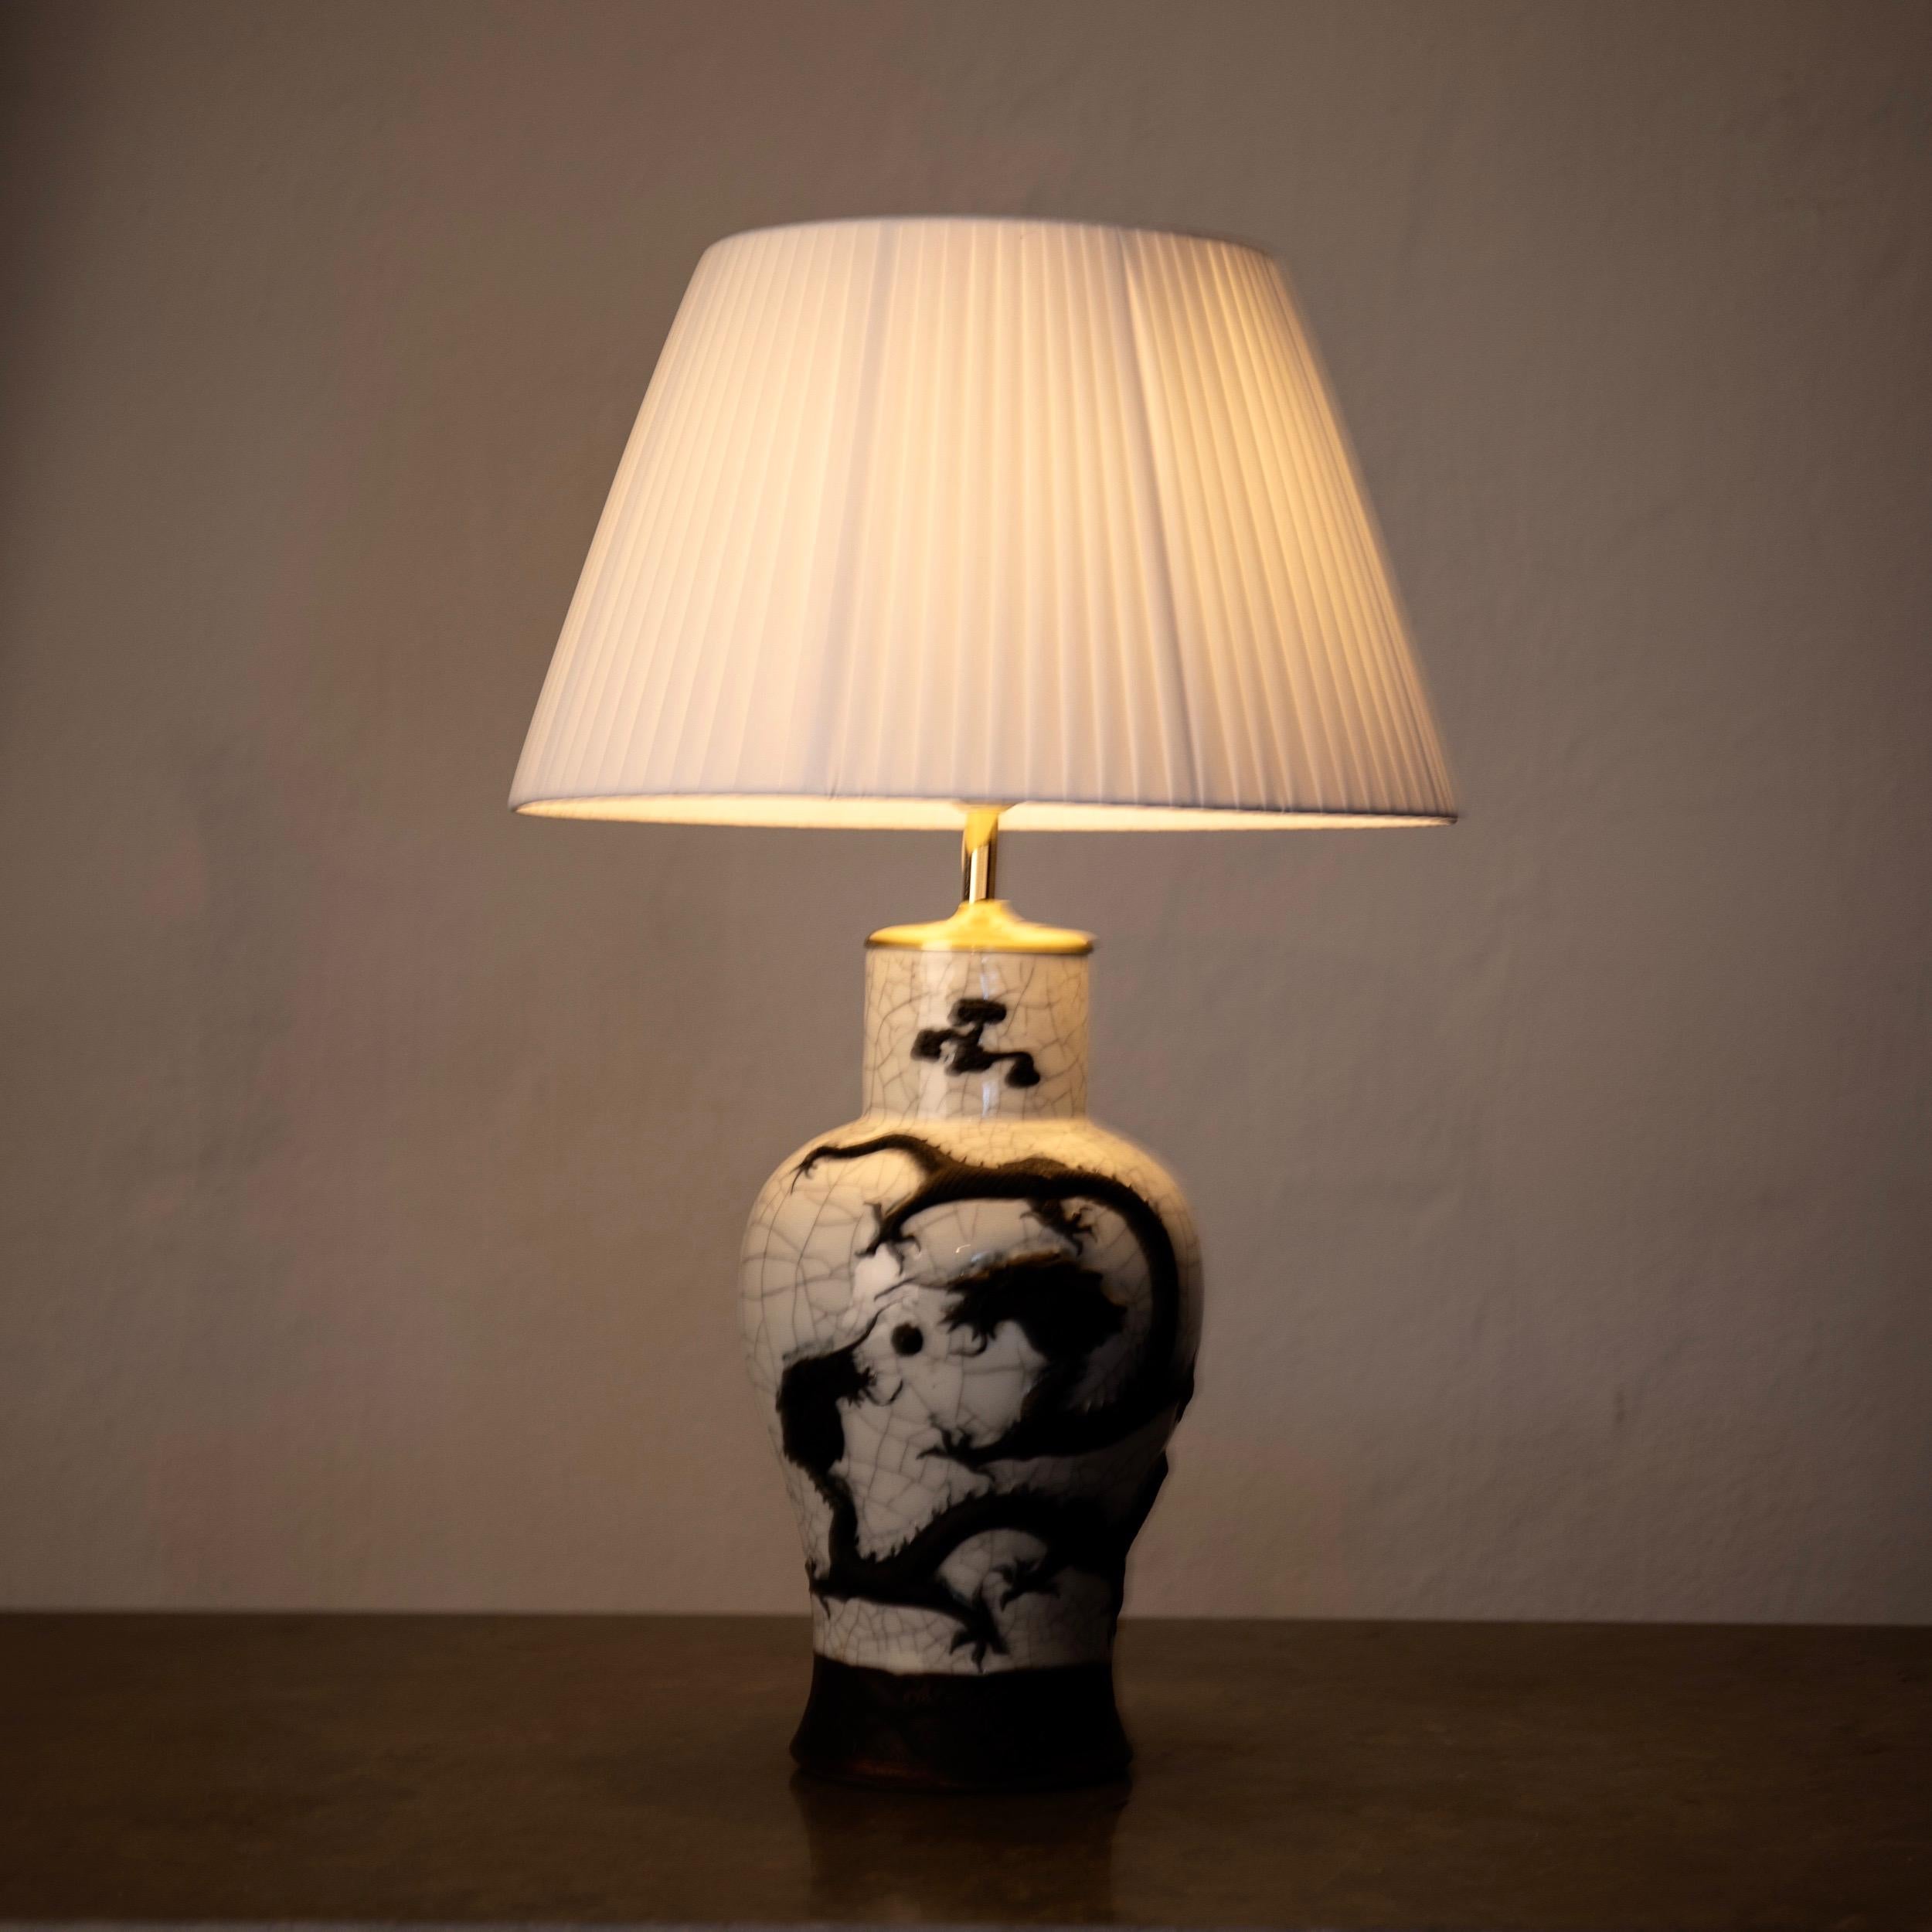 Table lamp black and white porcelain, China. A stunning table lamp in a white porcelain with dark bronze dragons. Height without shade: 17.5 inches. Diameter of foot 6 inches.